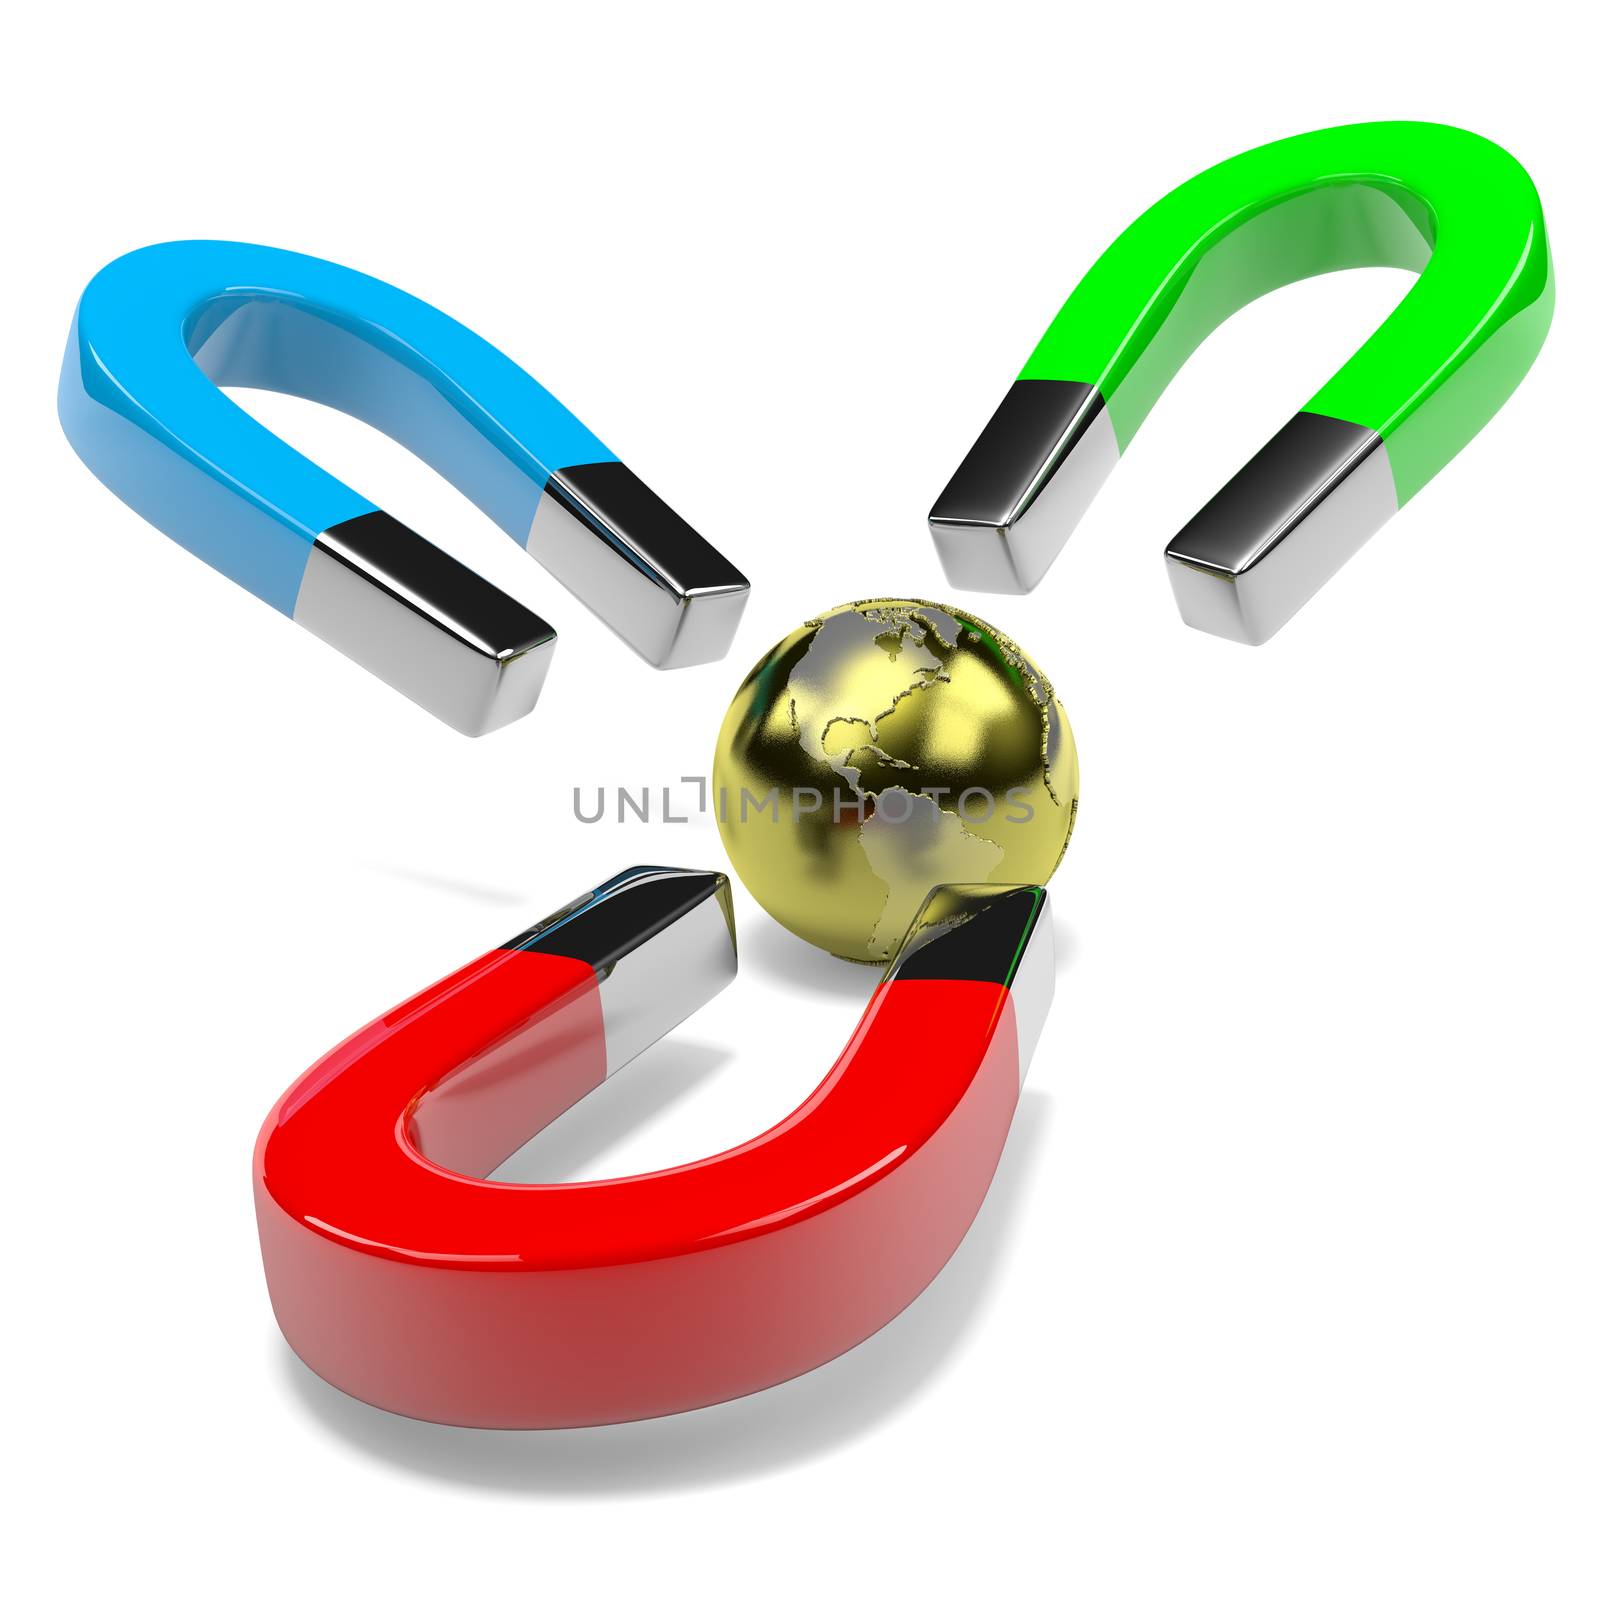 Three Magnets Attracting Metallic Earth on White Background 3D Illustration, Competition Concept